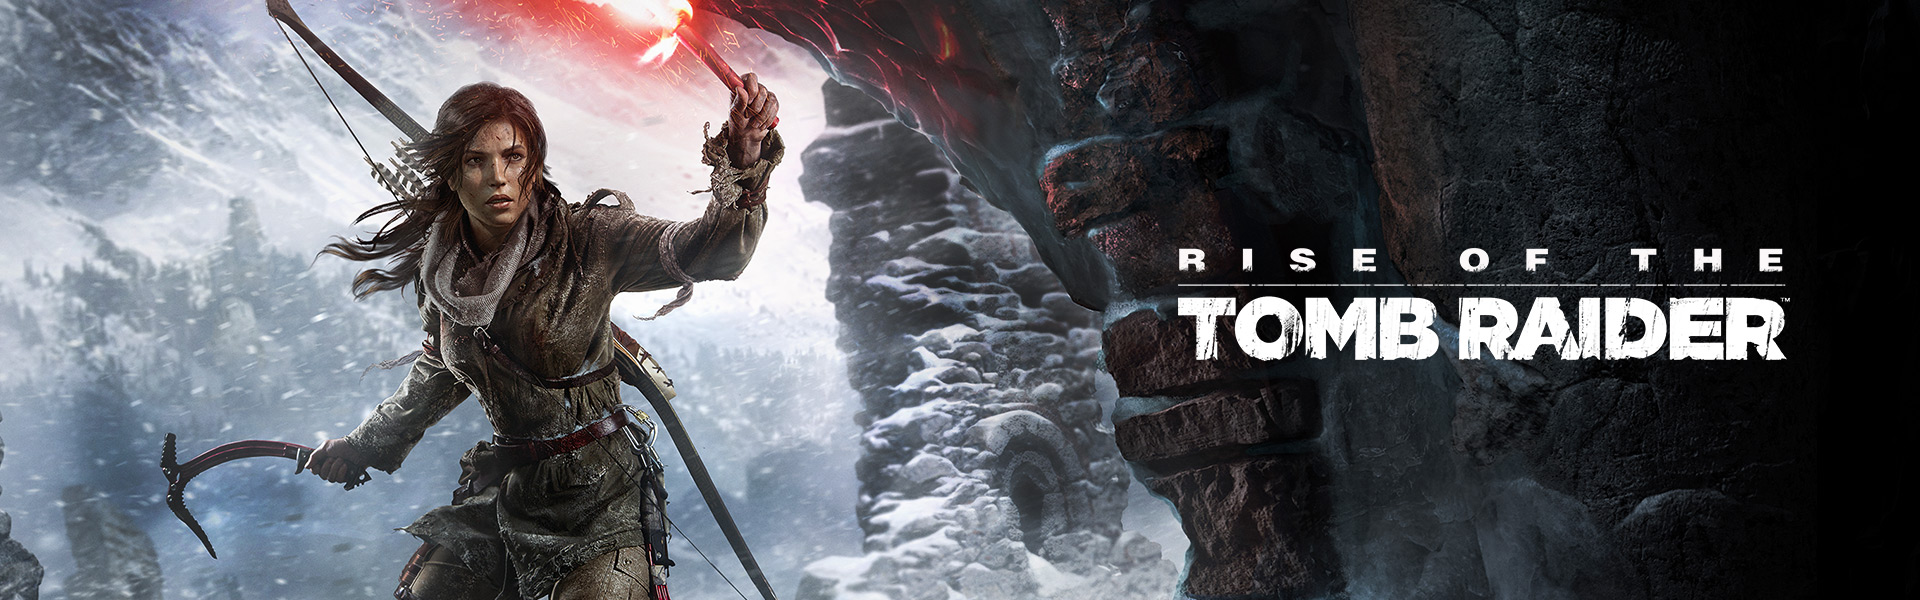 tombraider-videogame